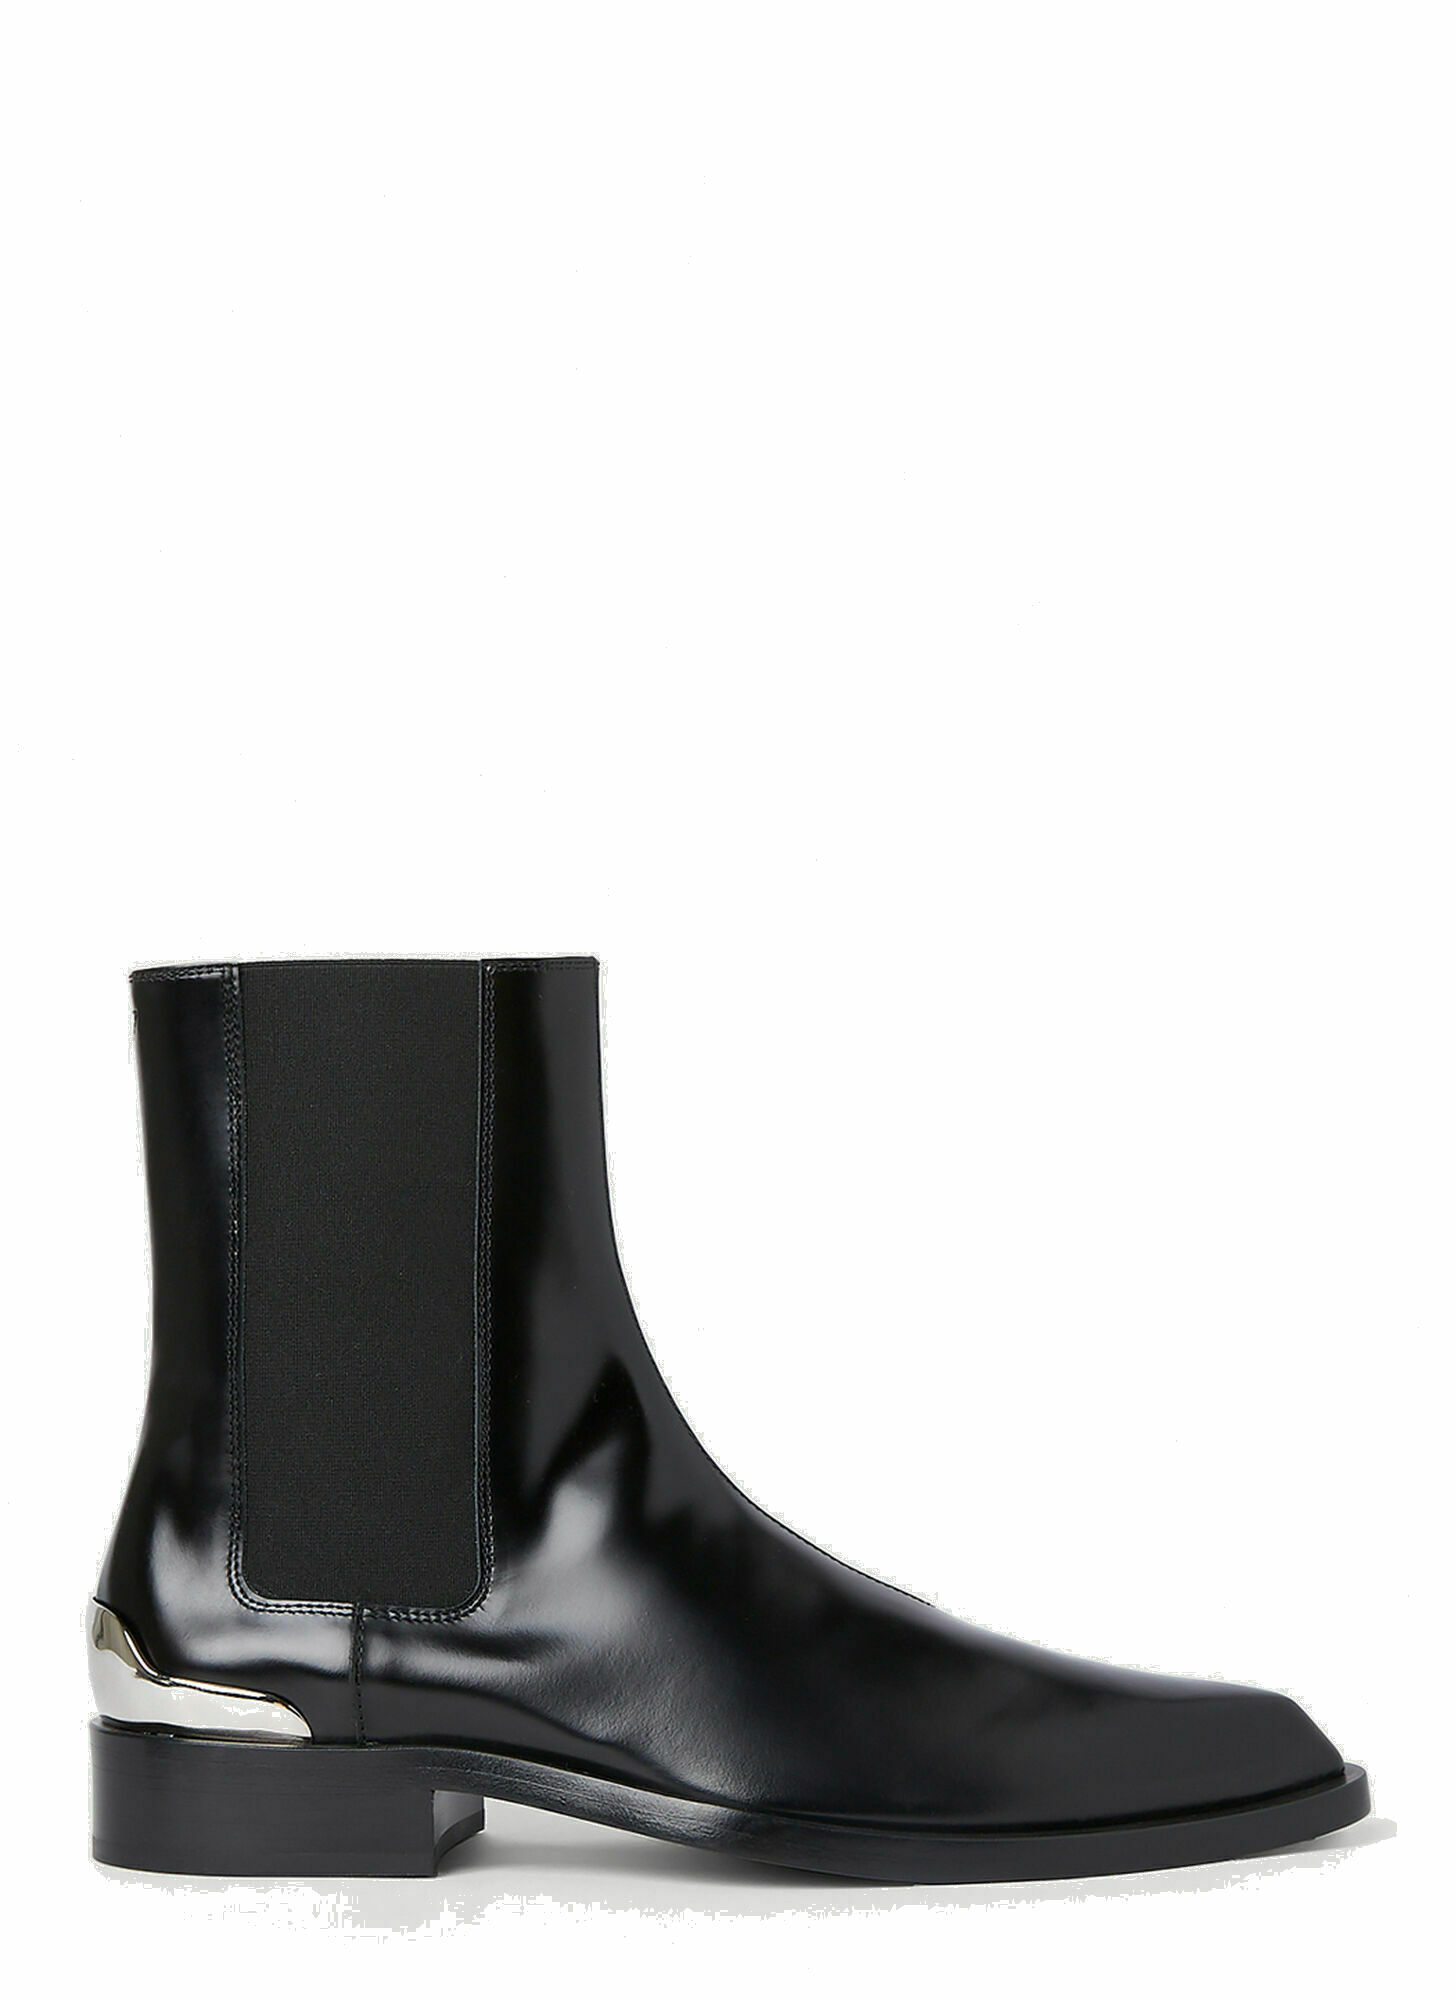 Photo: Jil Sander - Pointed Chelsea Boots in Black